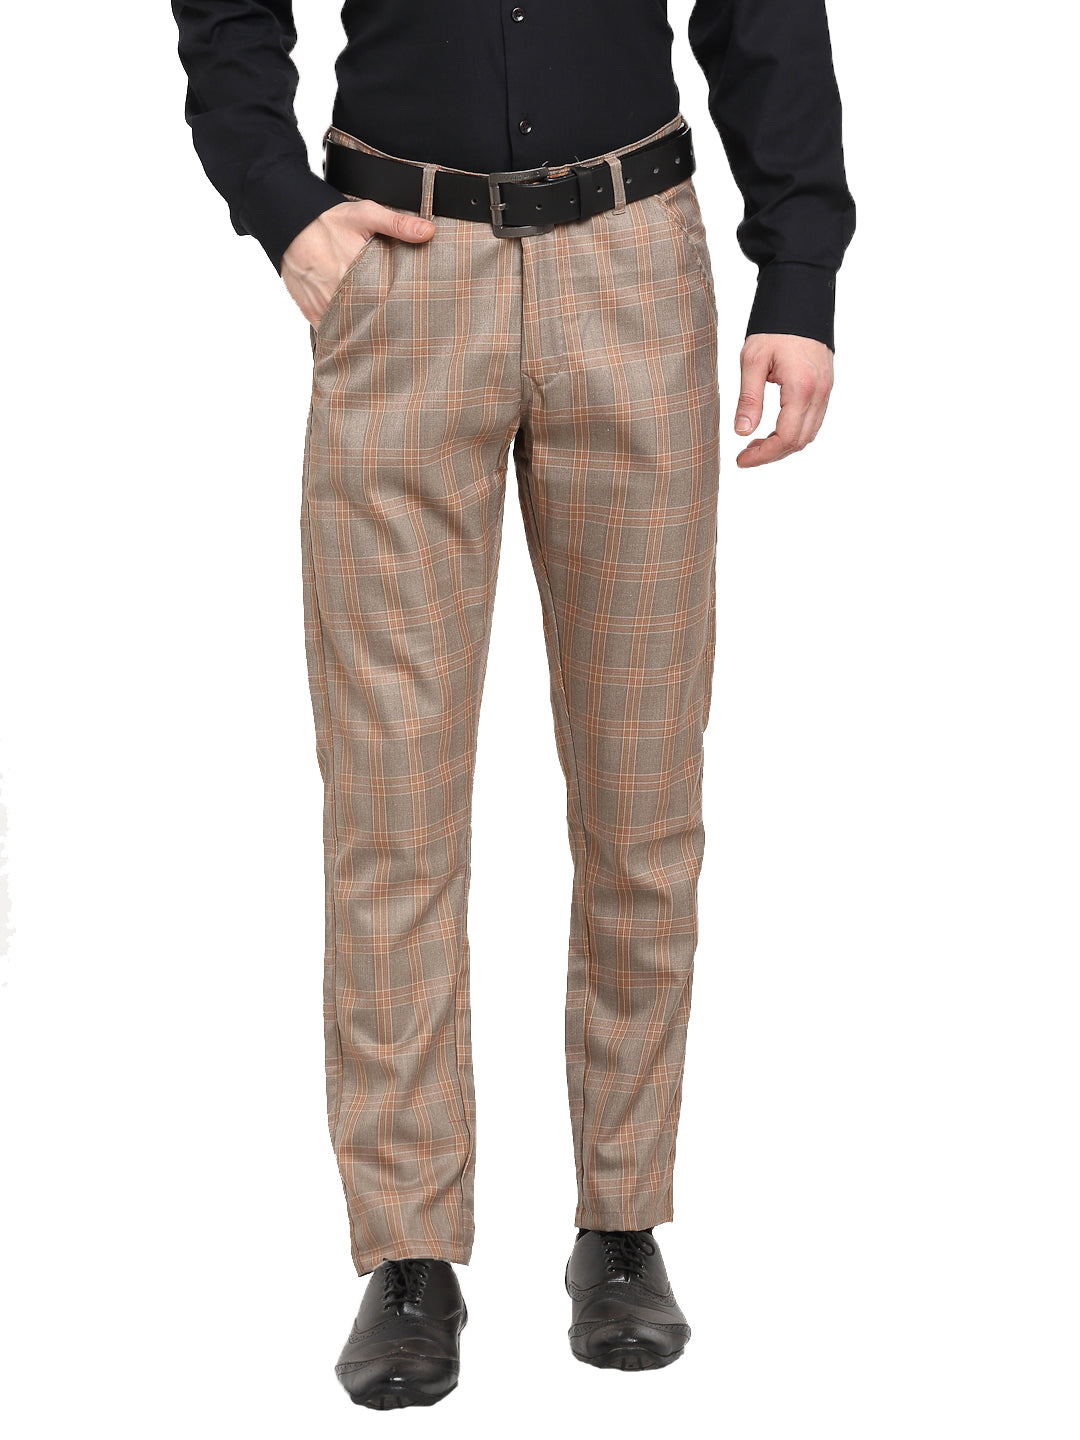 Men's Cotton Blend Black & Off White Checked Formal Trousers - Sojanya |  Business casual men, White collared shirt, Checked trousers